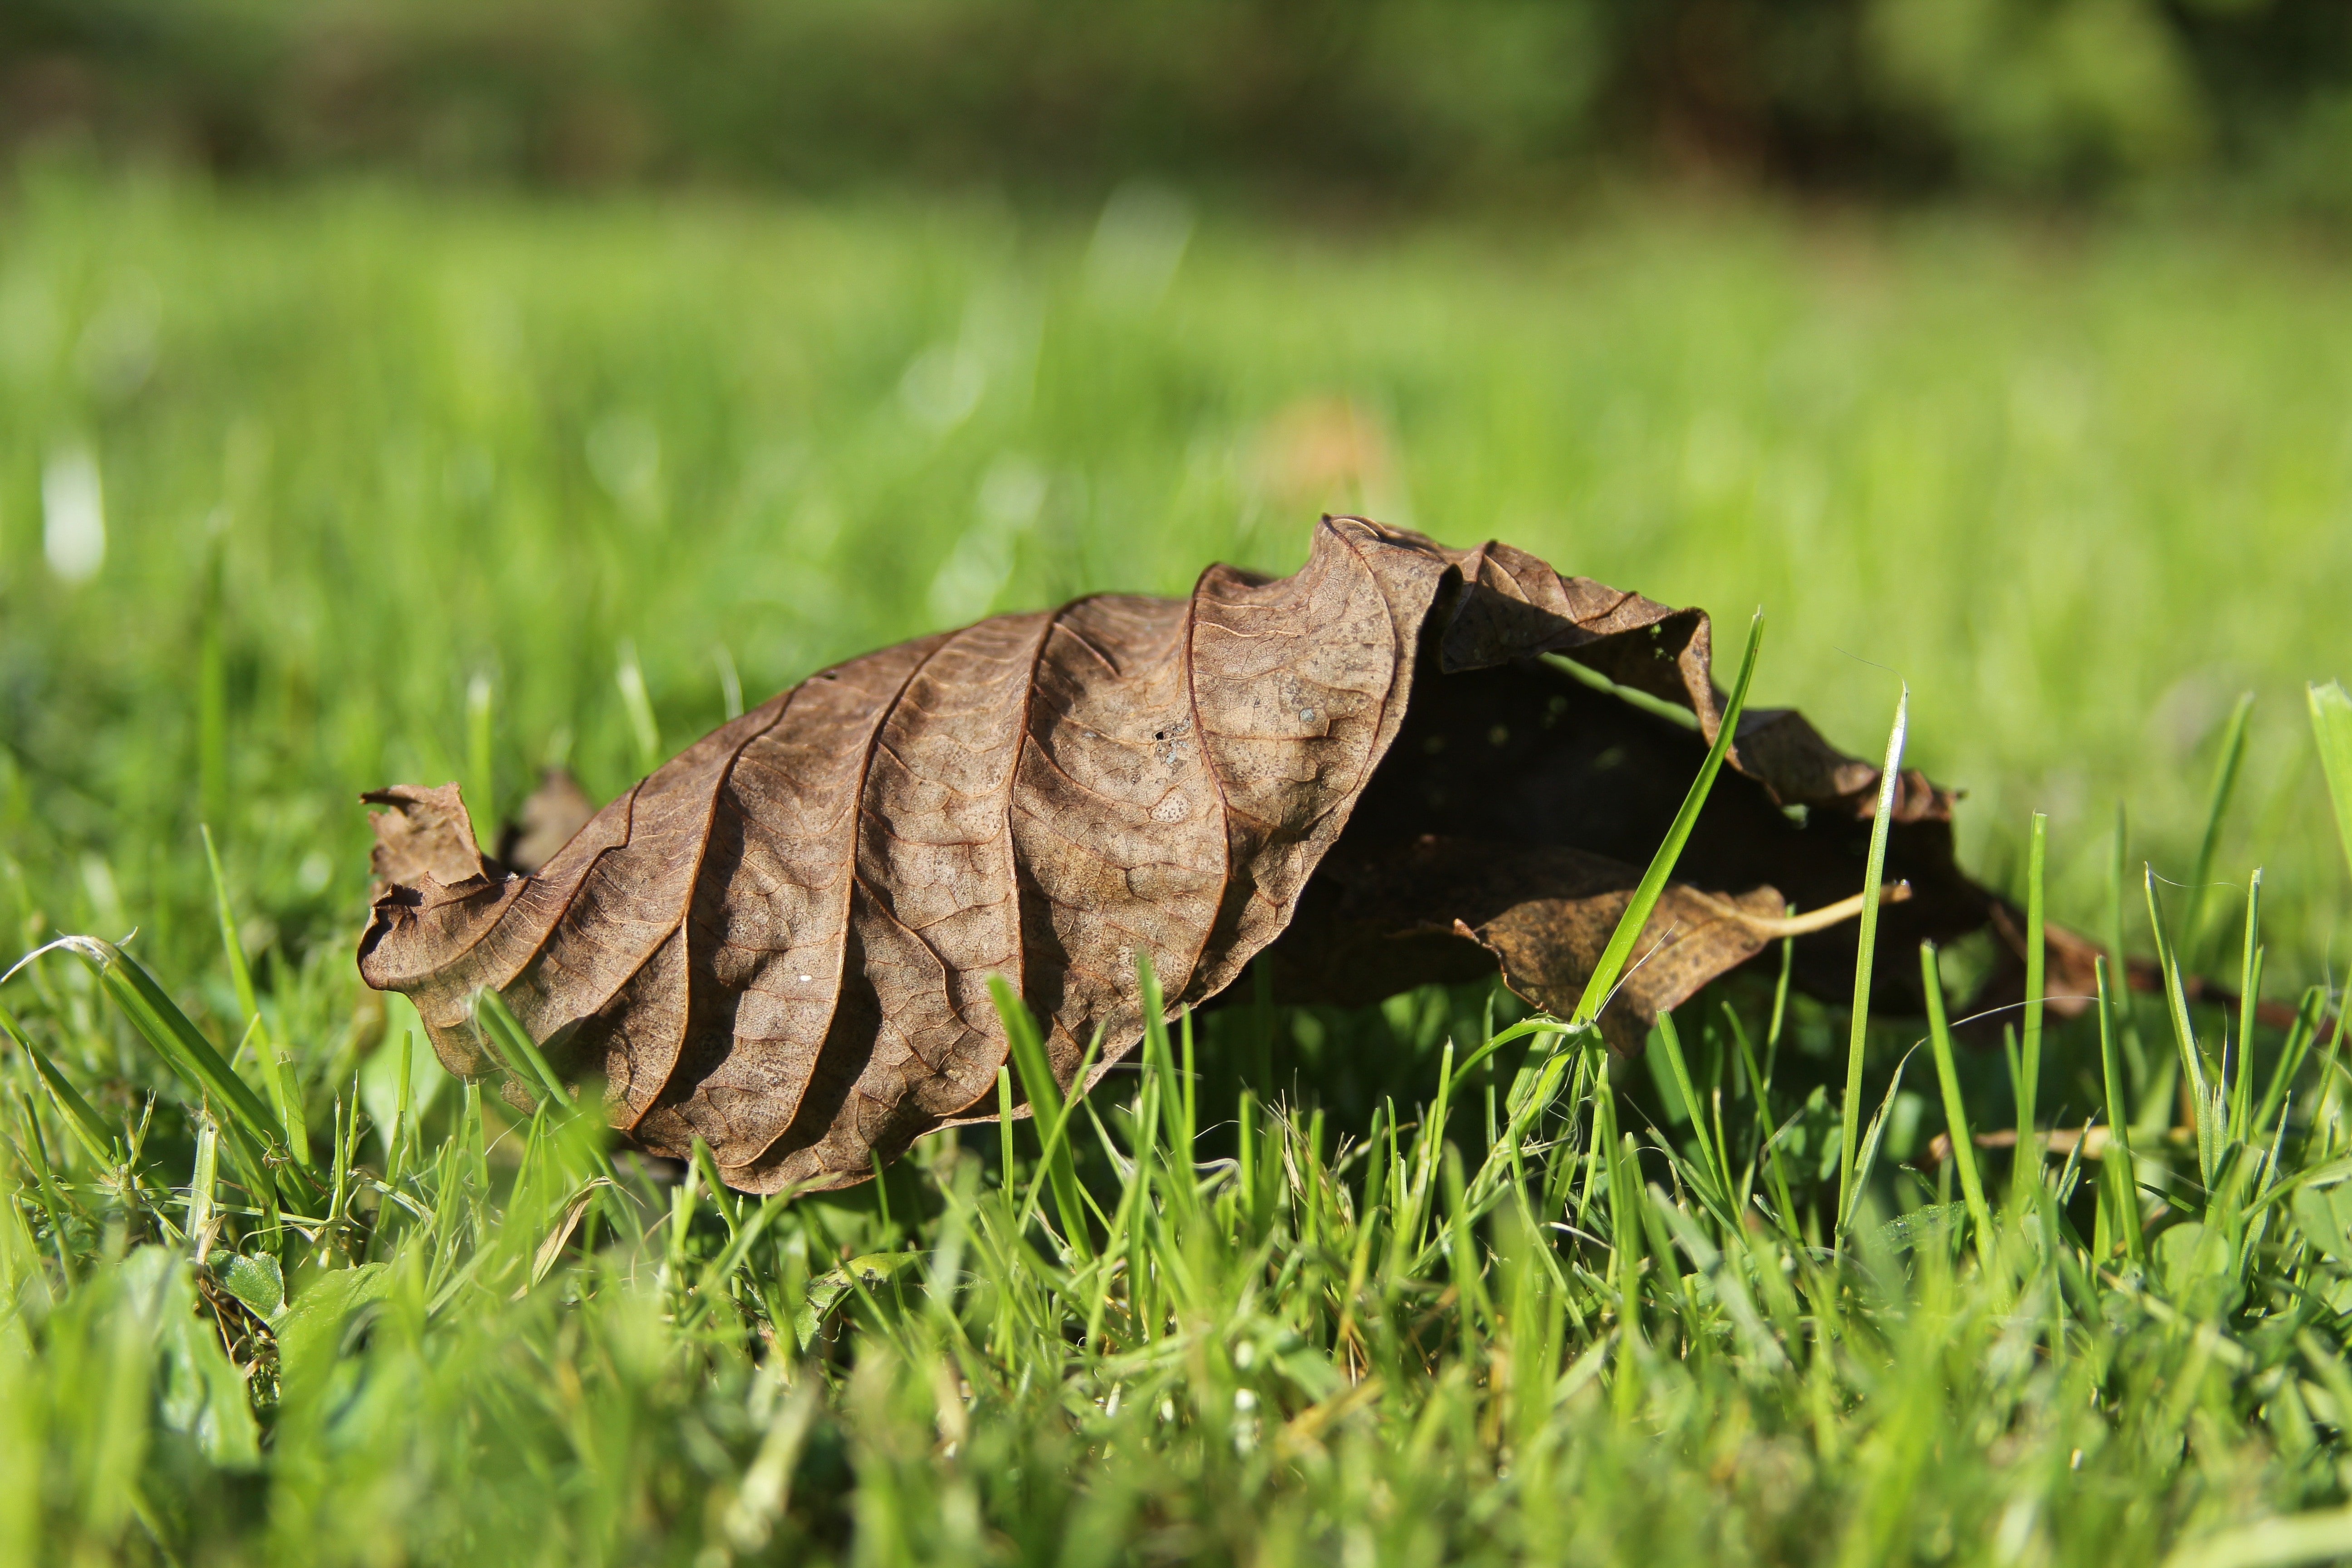 withered leaf lying on the grass